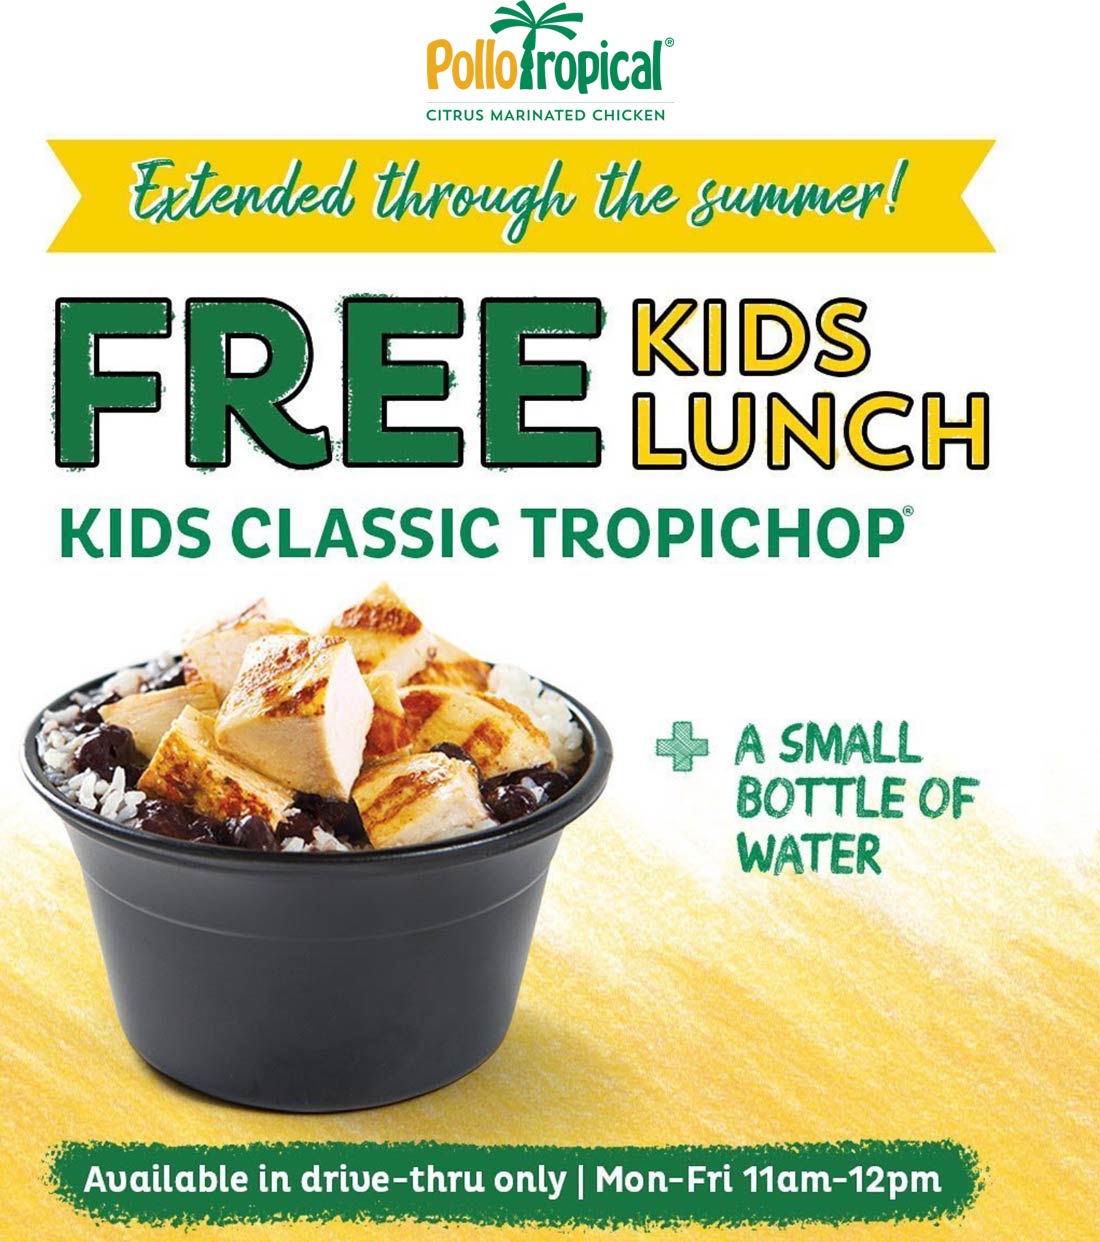 Pollo Tropical restaurants Coupon  Free kids lunch + water bottle at Pollo Tropical weekdays 11a-12p #pollotropical